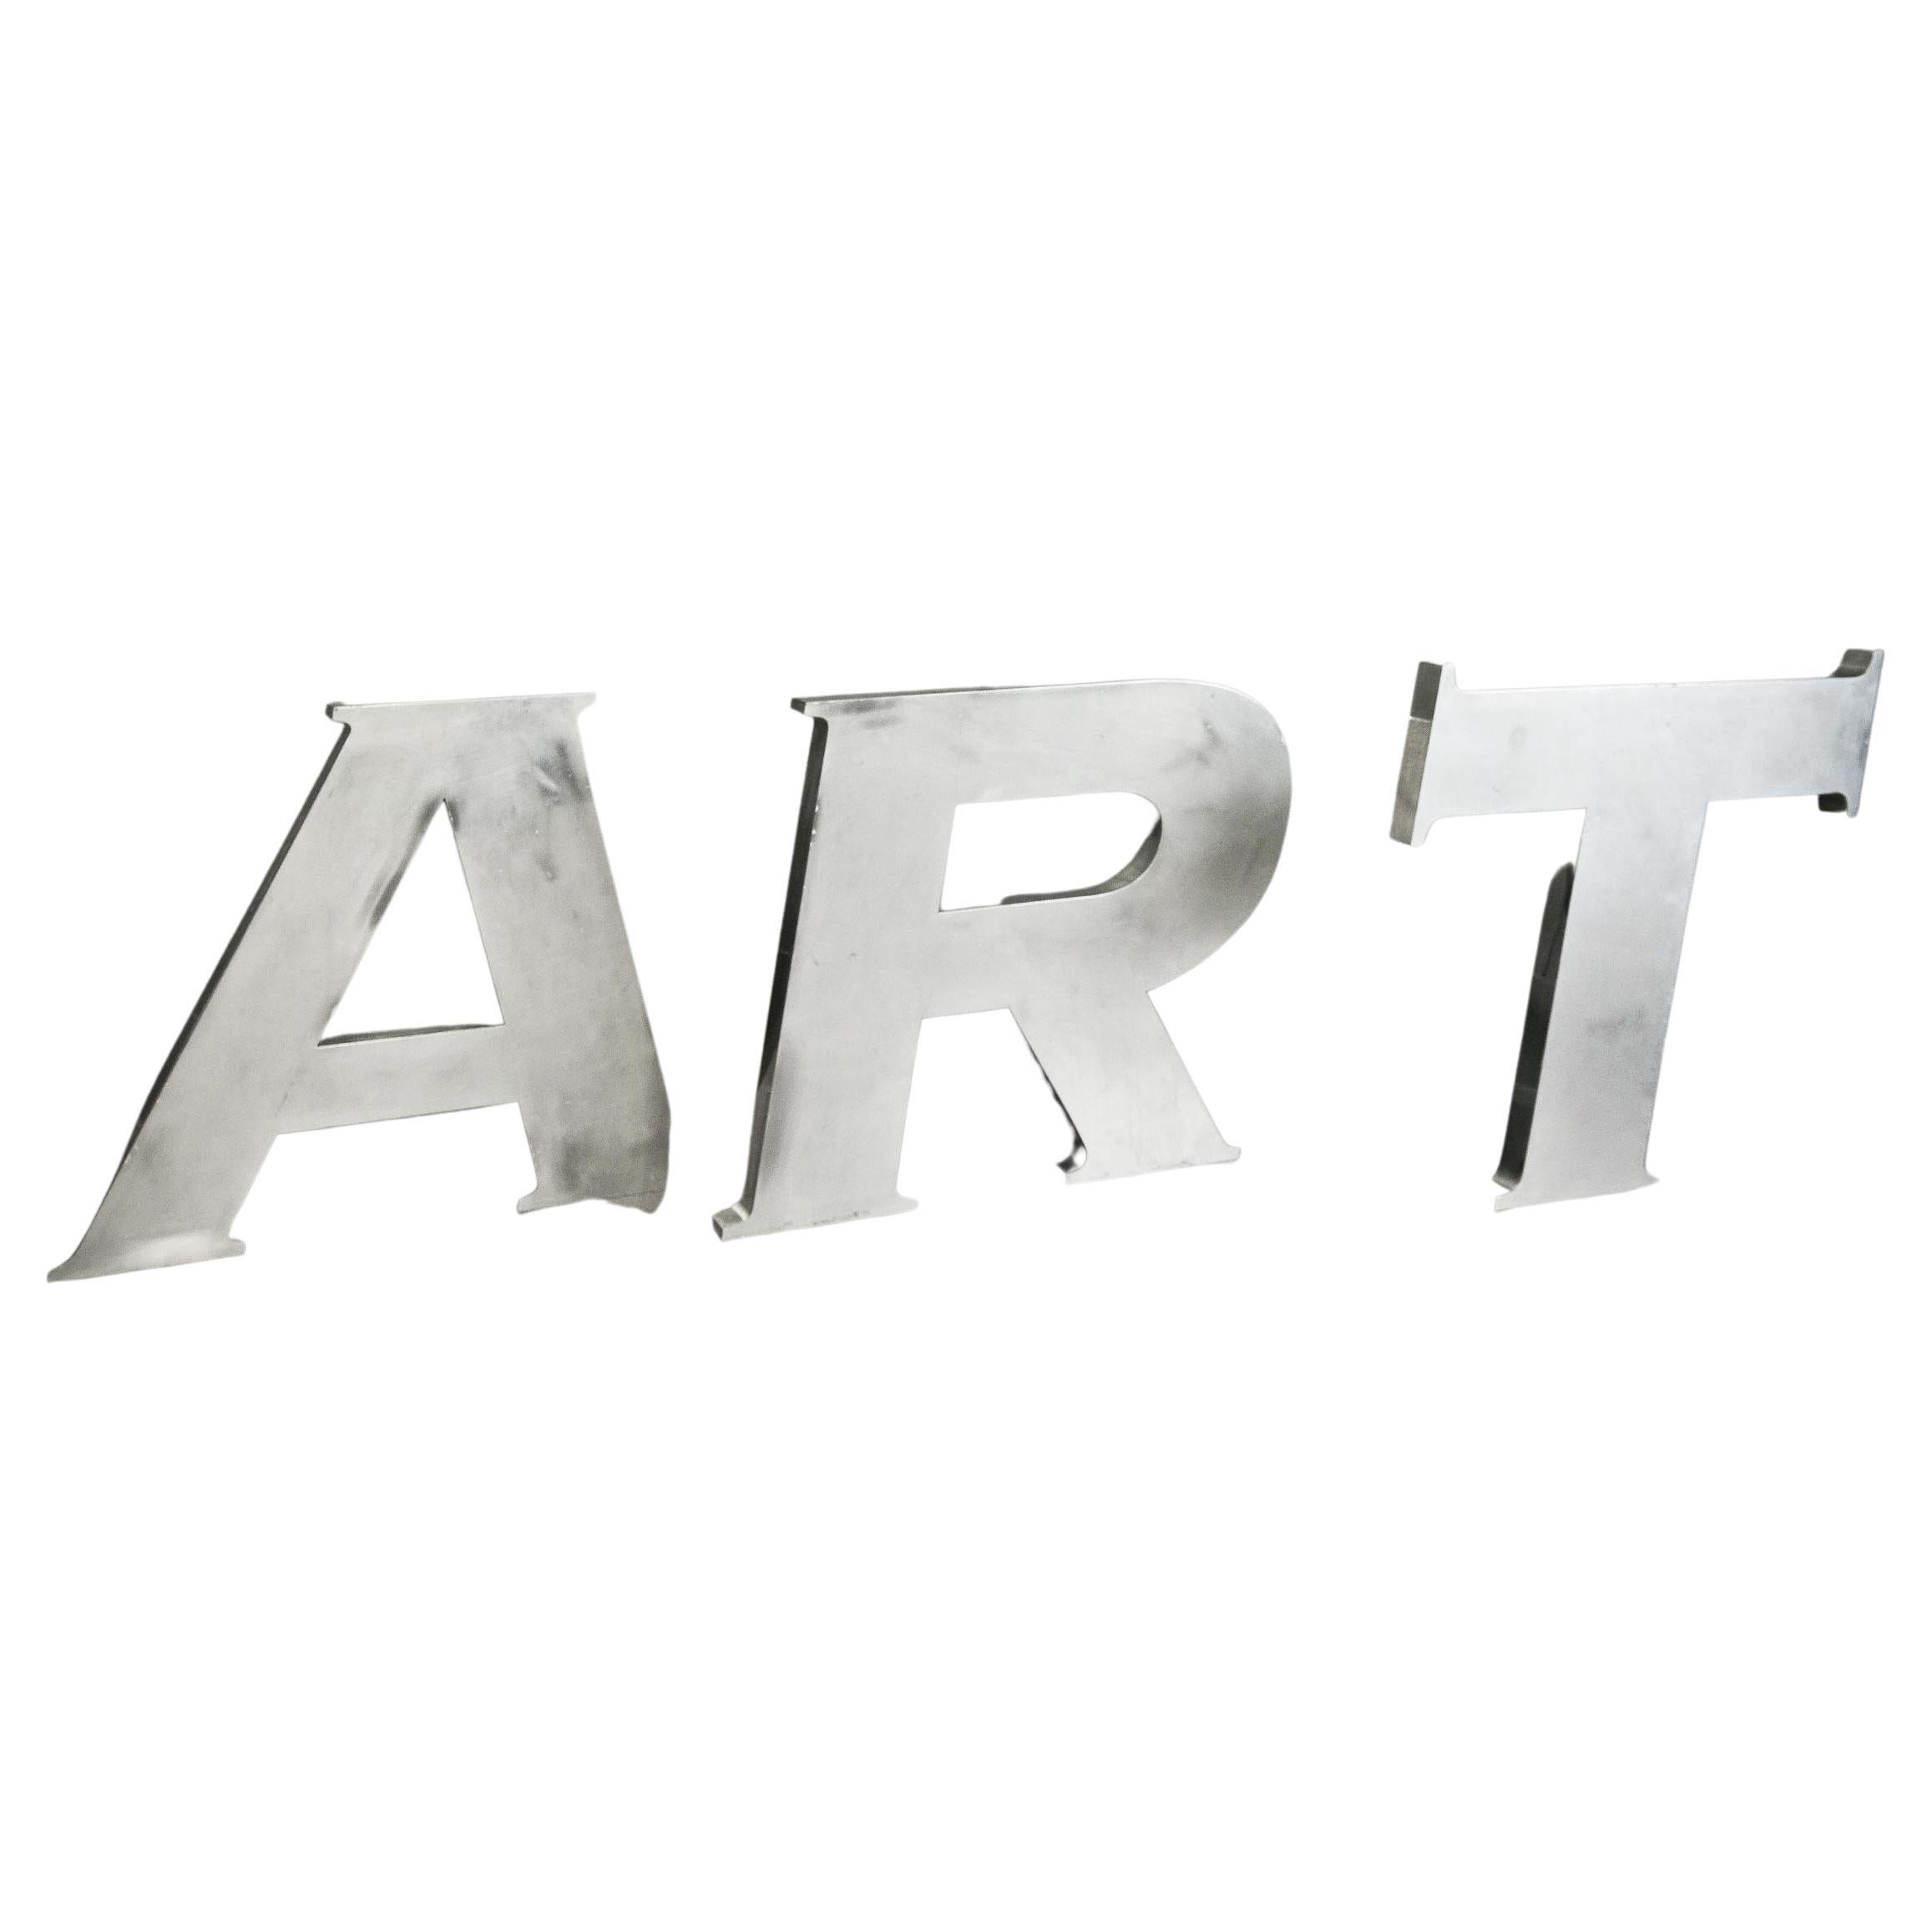 Chromed Stainless Steel Letters A-R-T